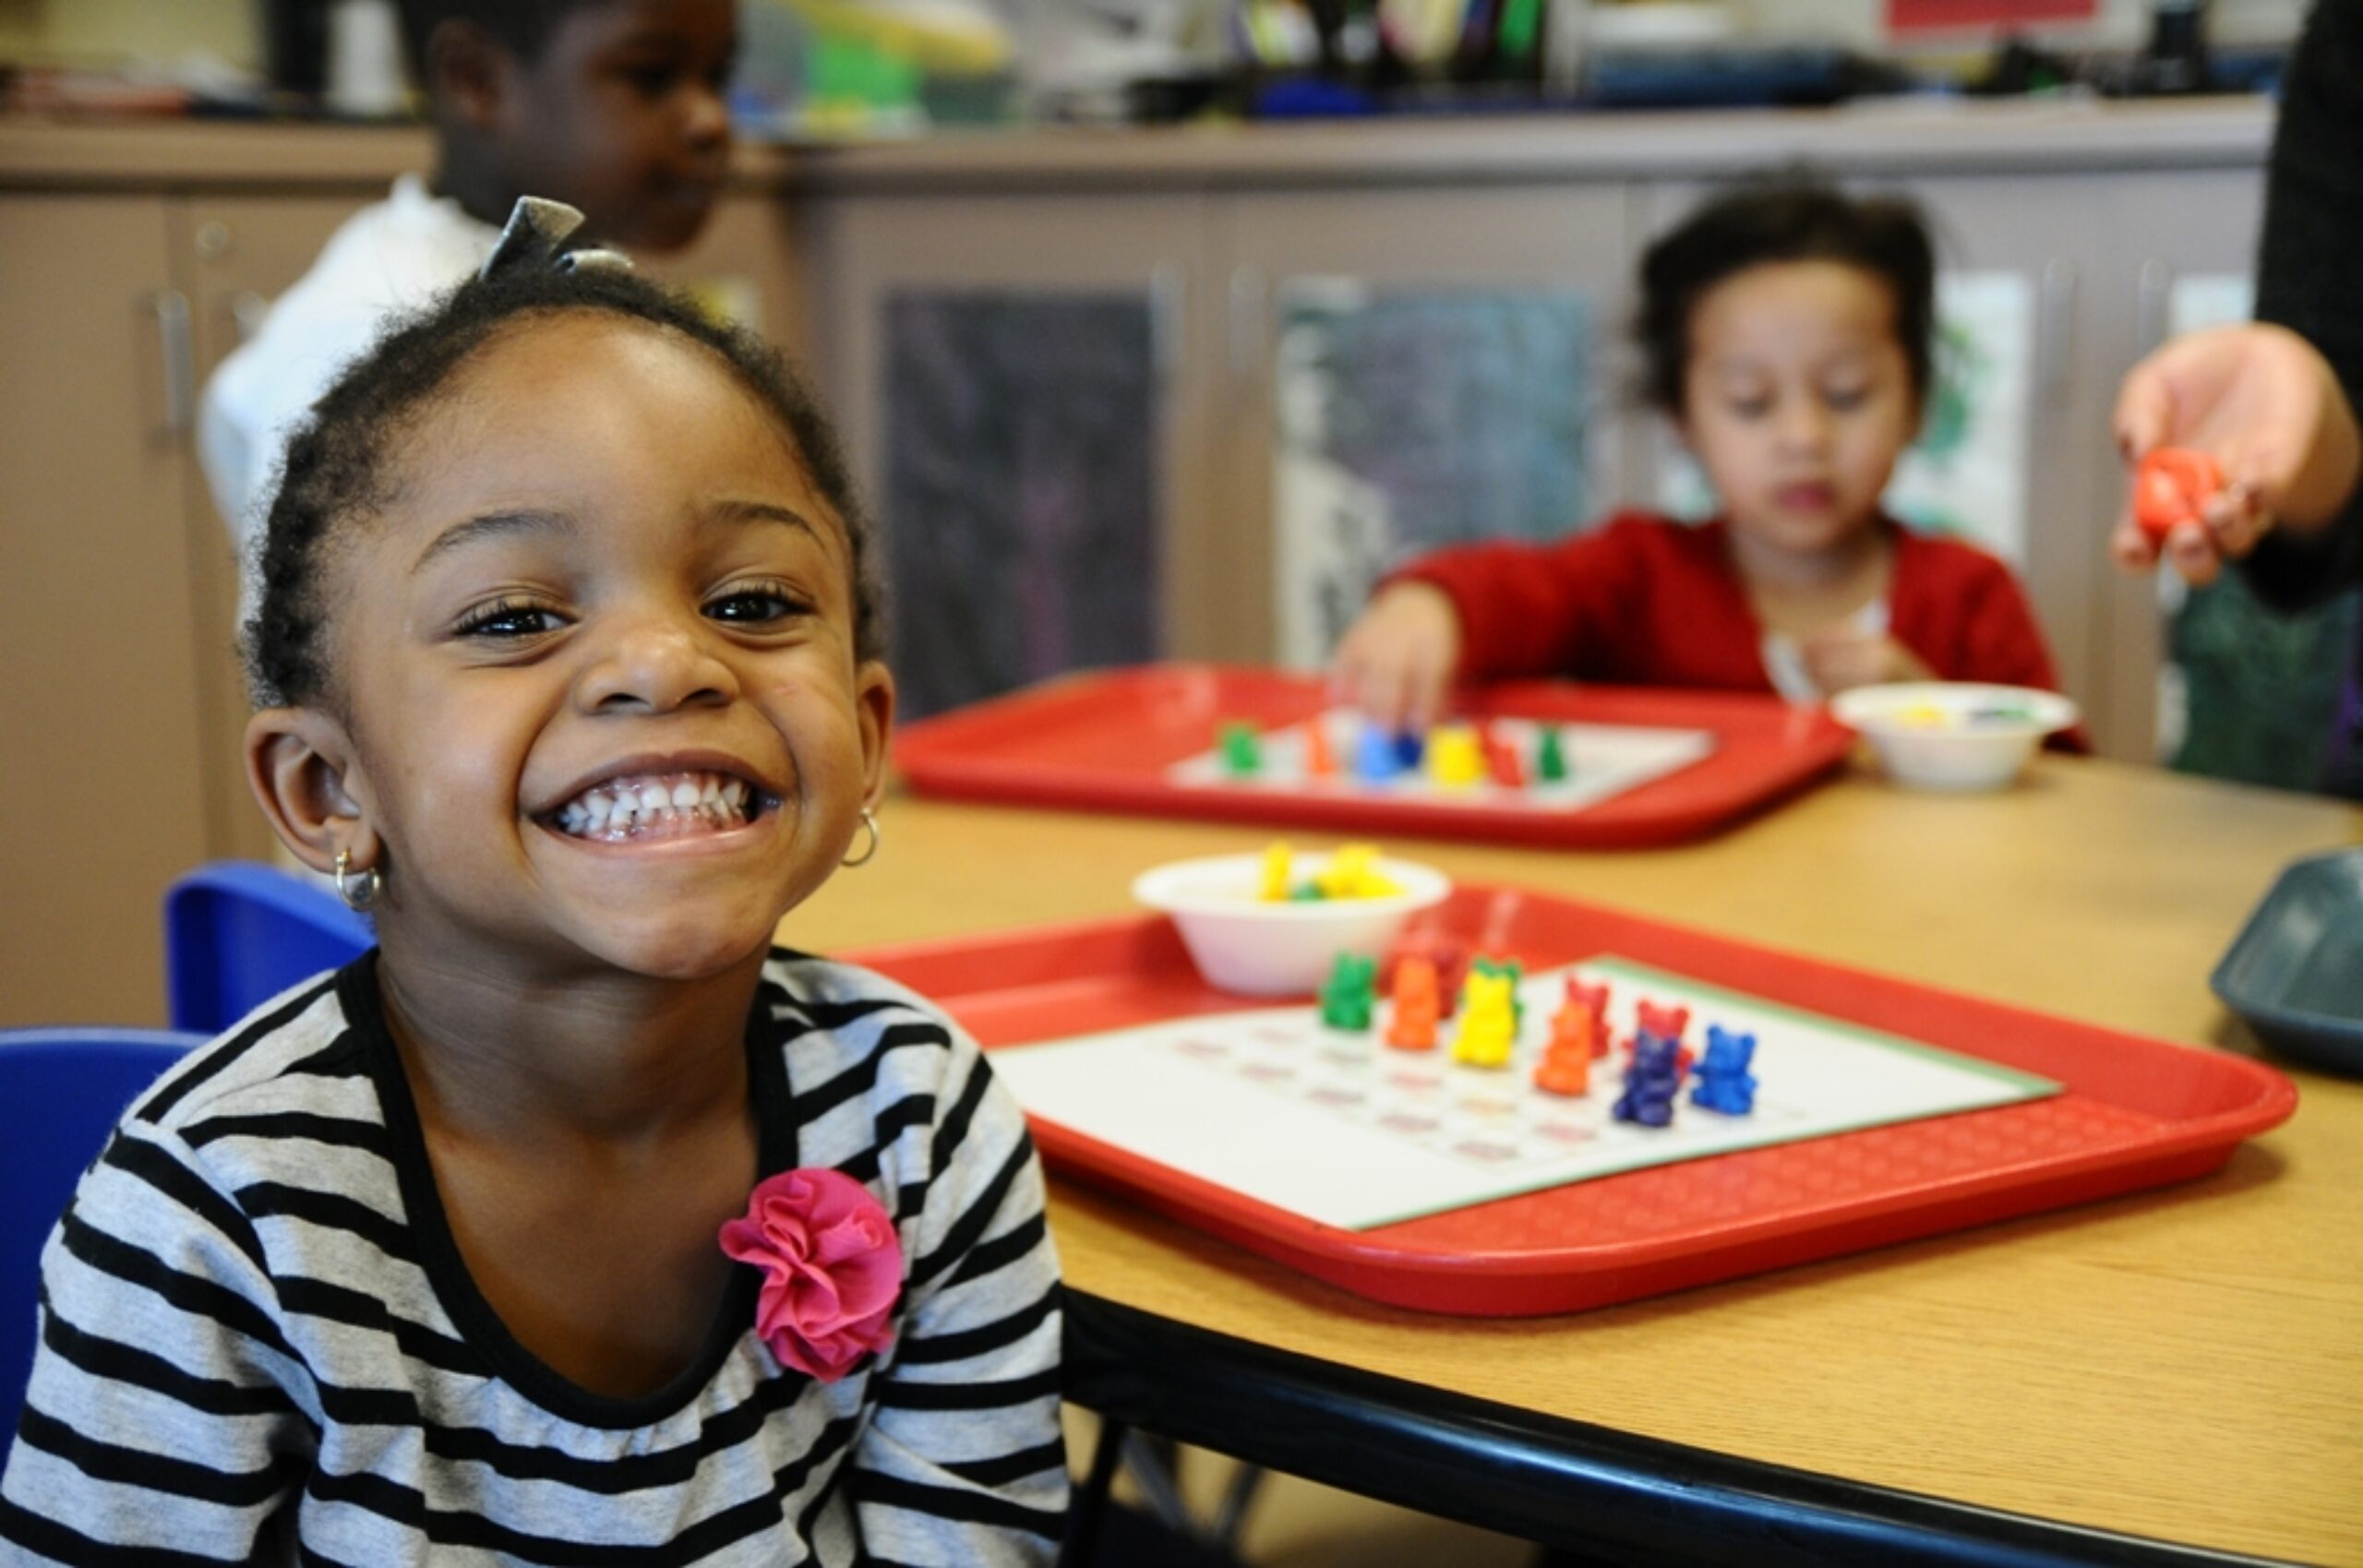 A smiling child taking part in an activity at preschool